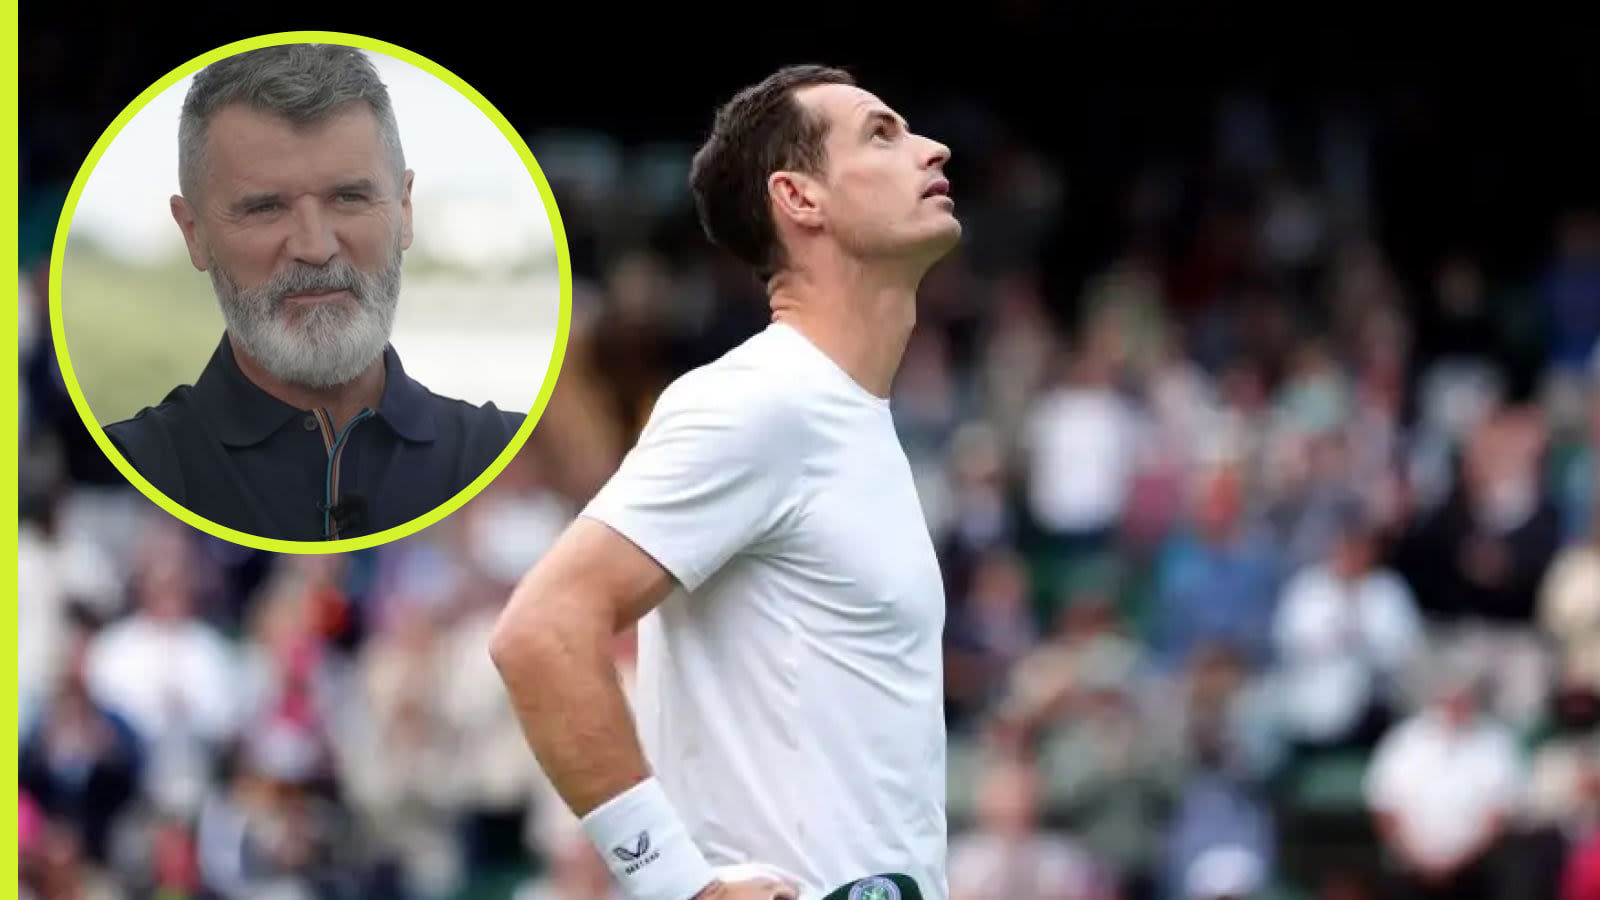 Roy Keane’s less than glowing tribute to Andy Murray after emotional Wimbledon farewell